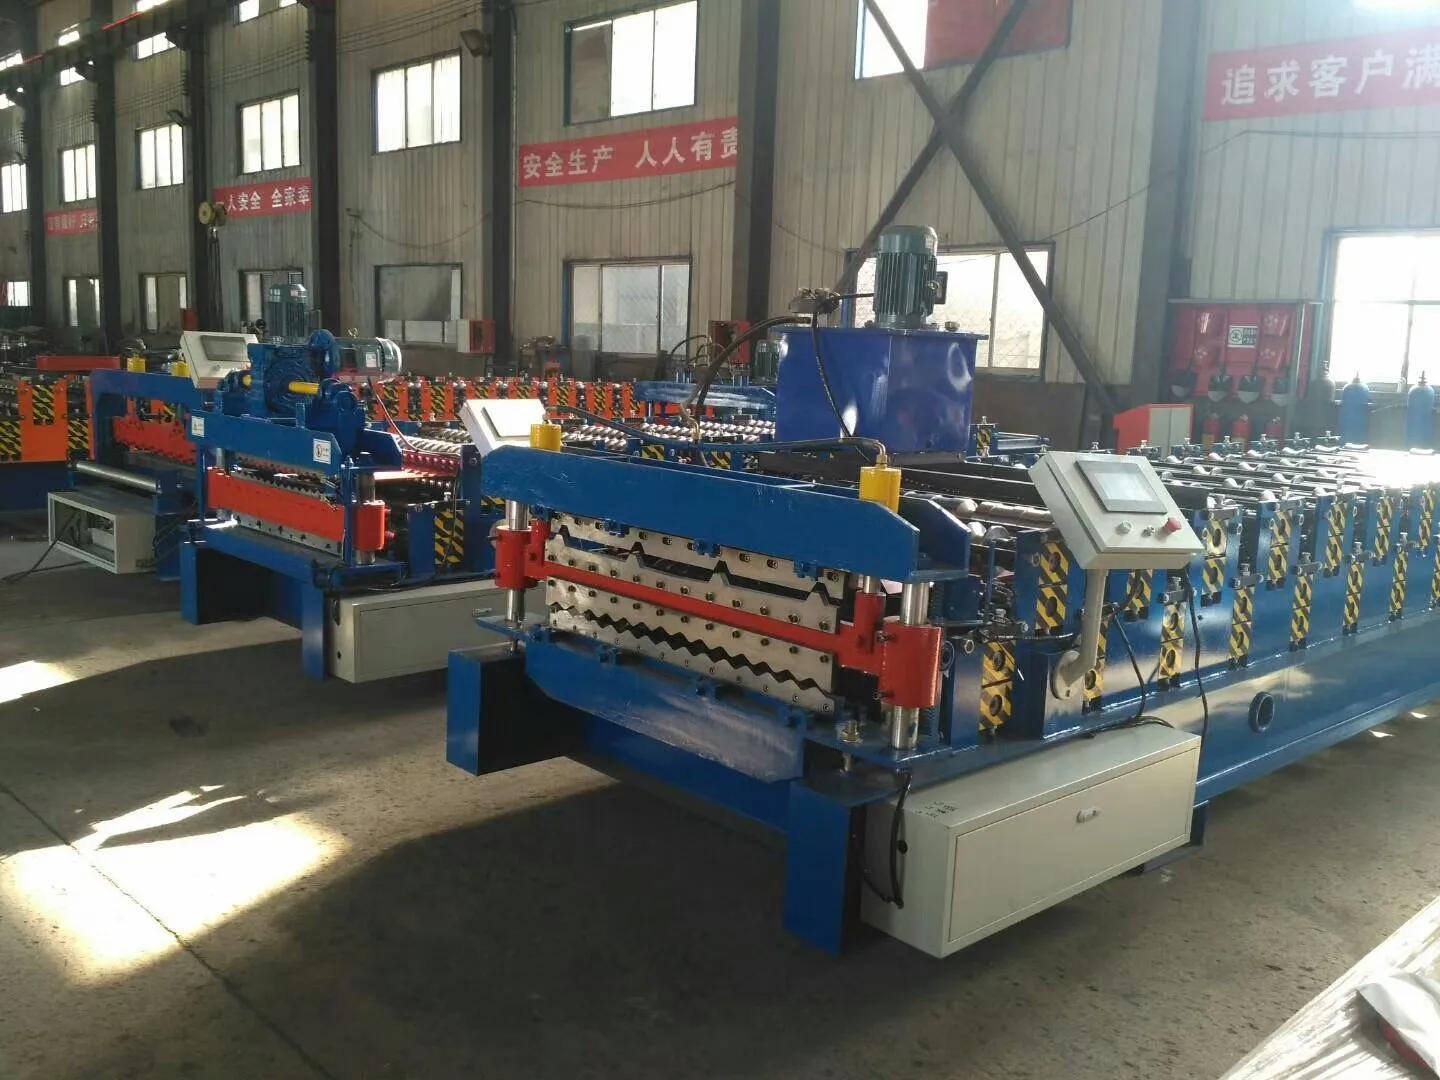 Glazed steel tile roof roll forming machine